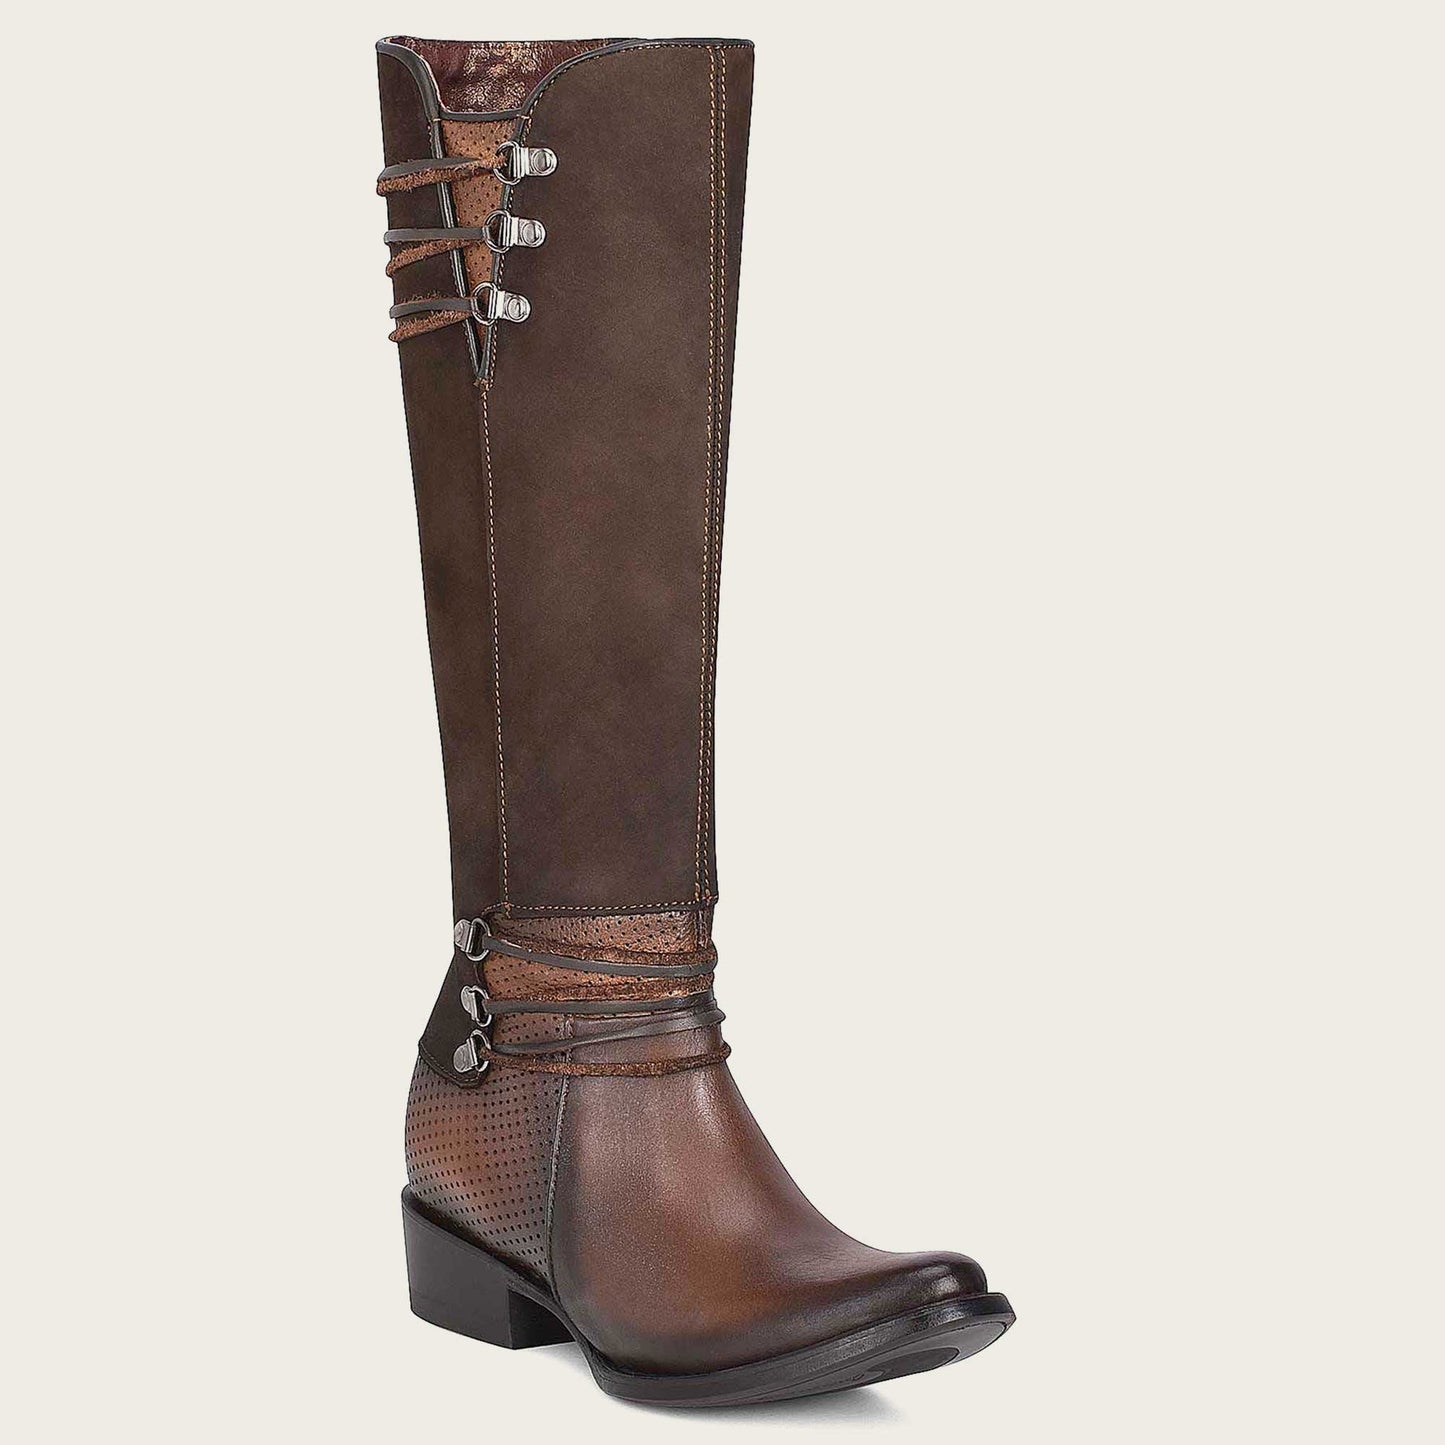 Brown boot with suede tube and metallic details